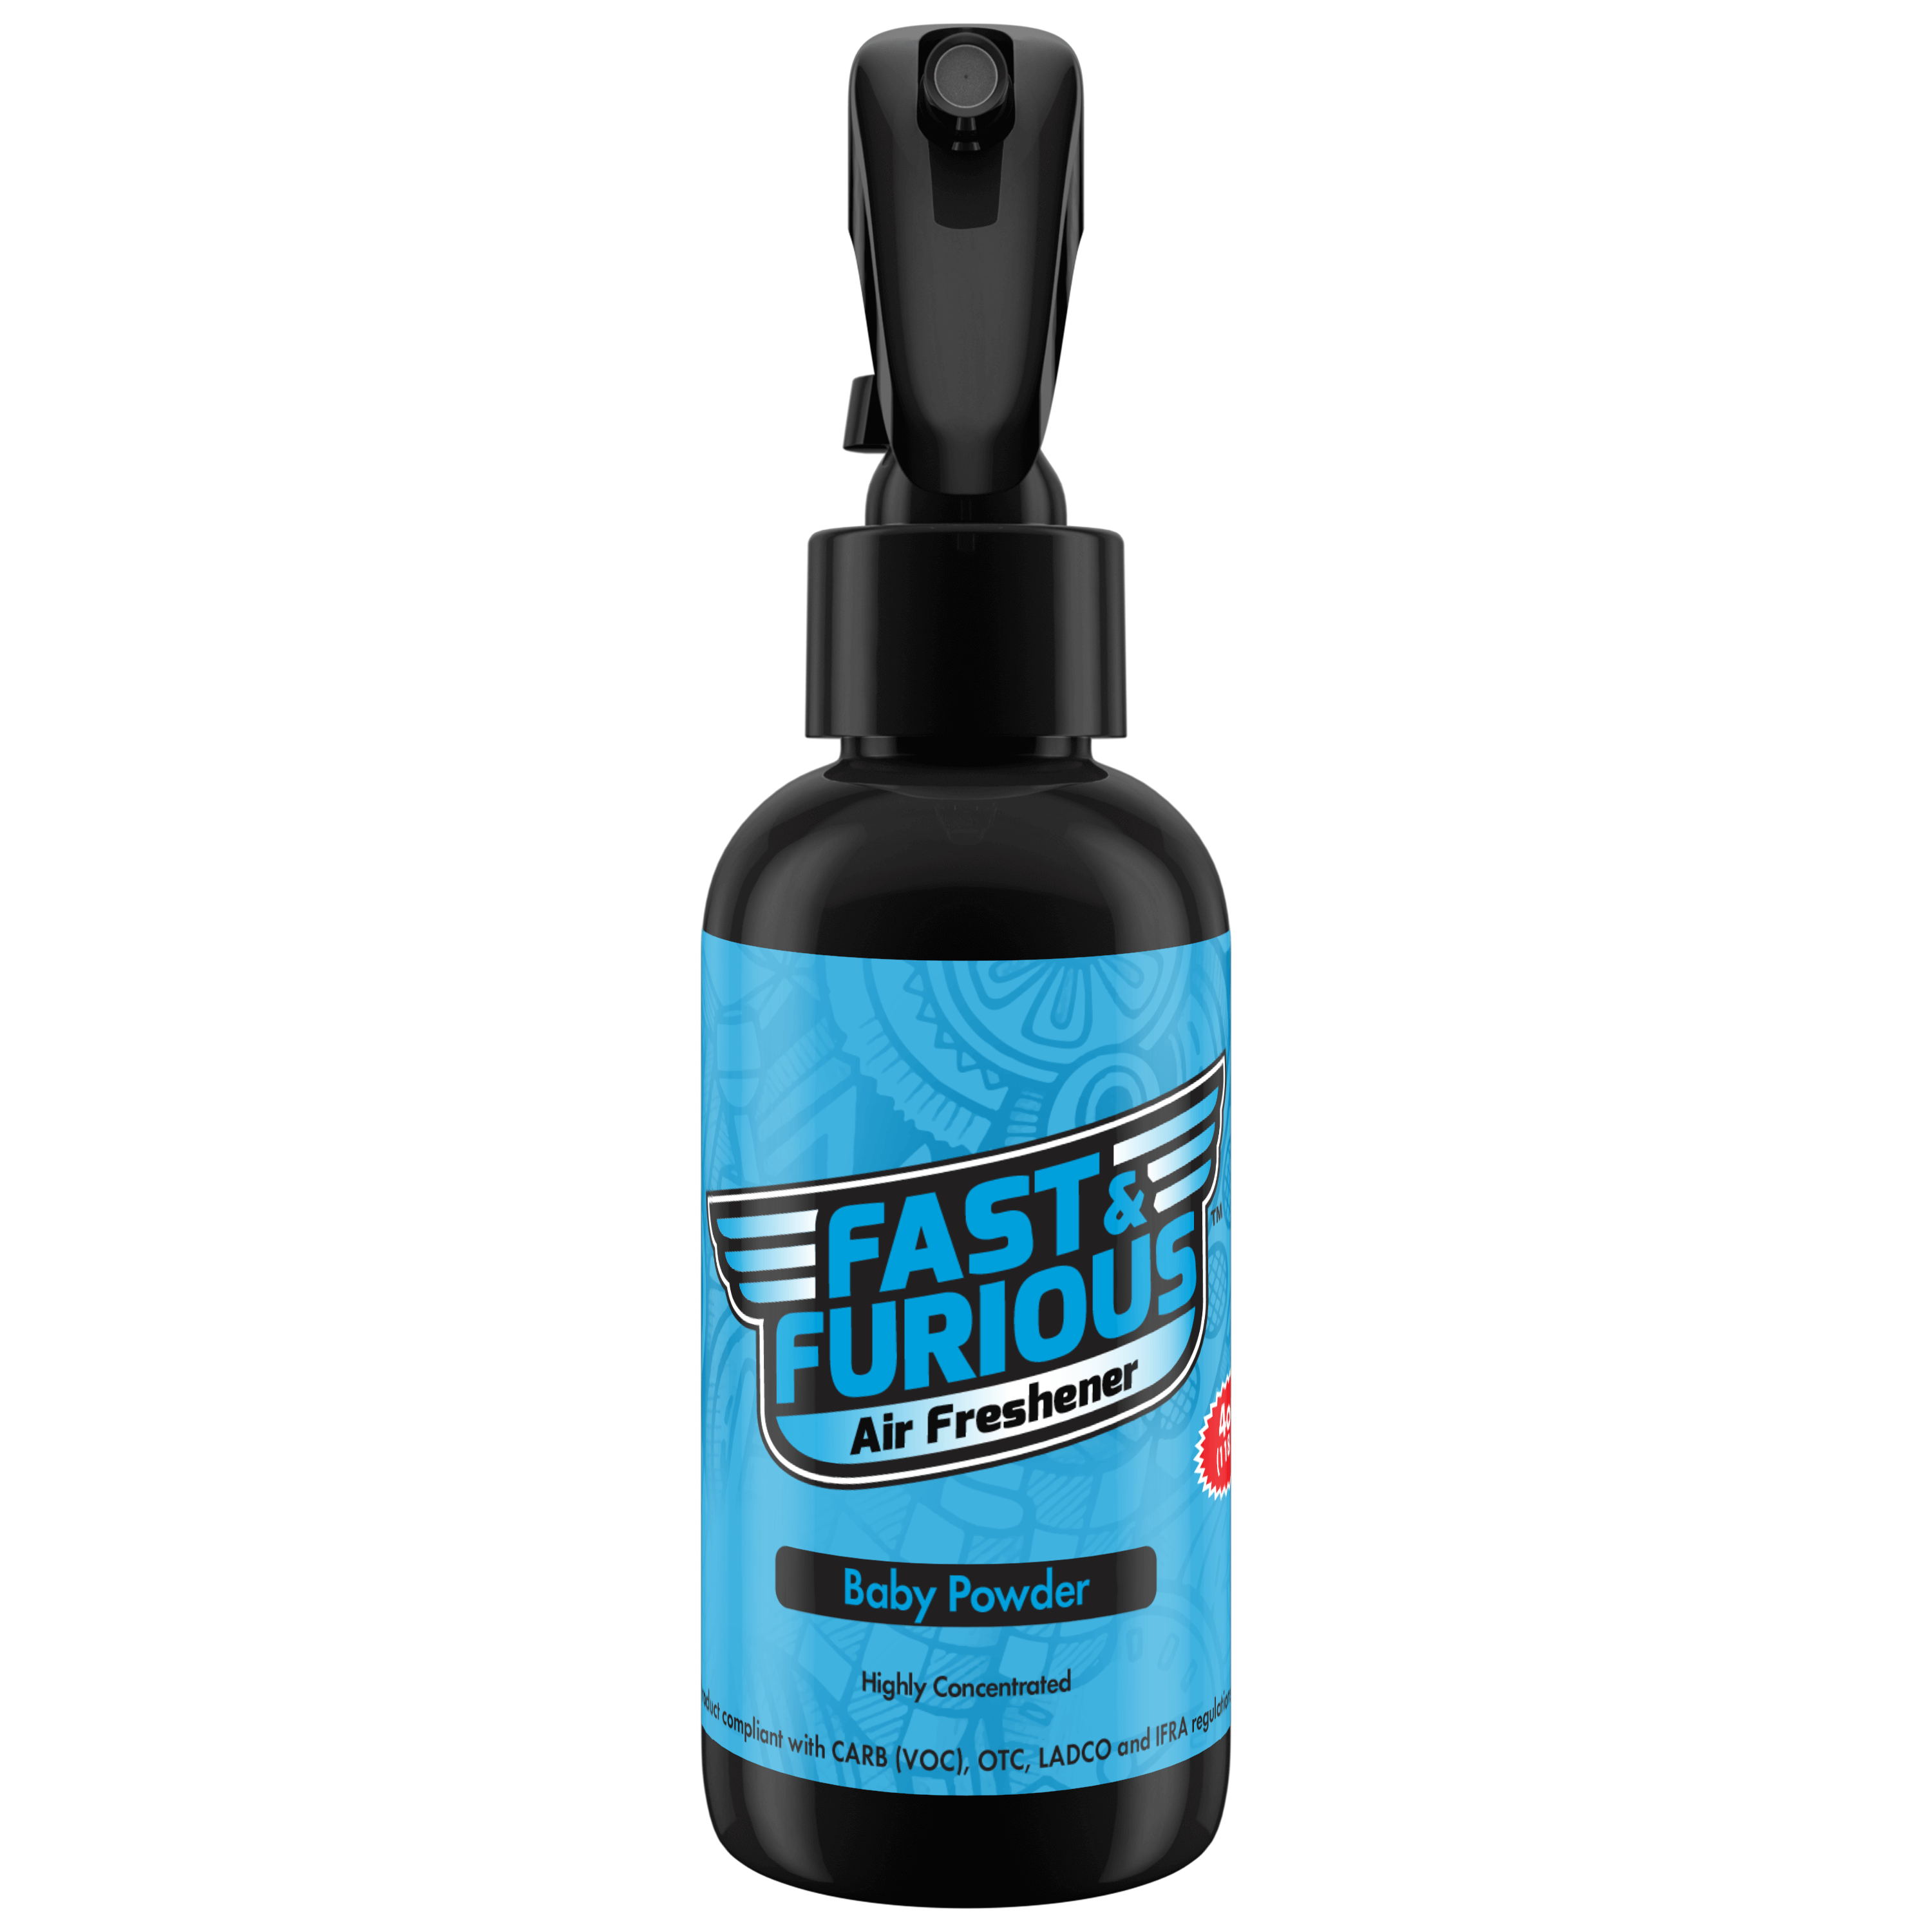 Fast and Furious Air Freshener - Baby Powder Scent